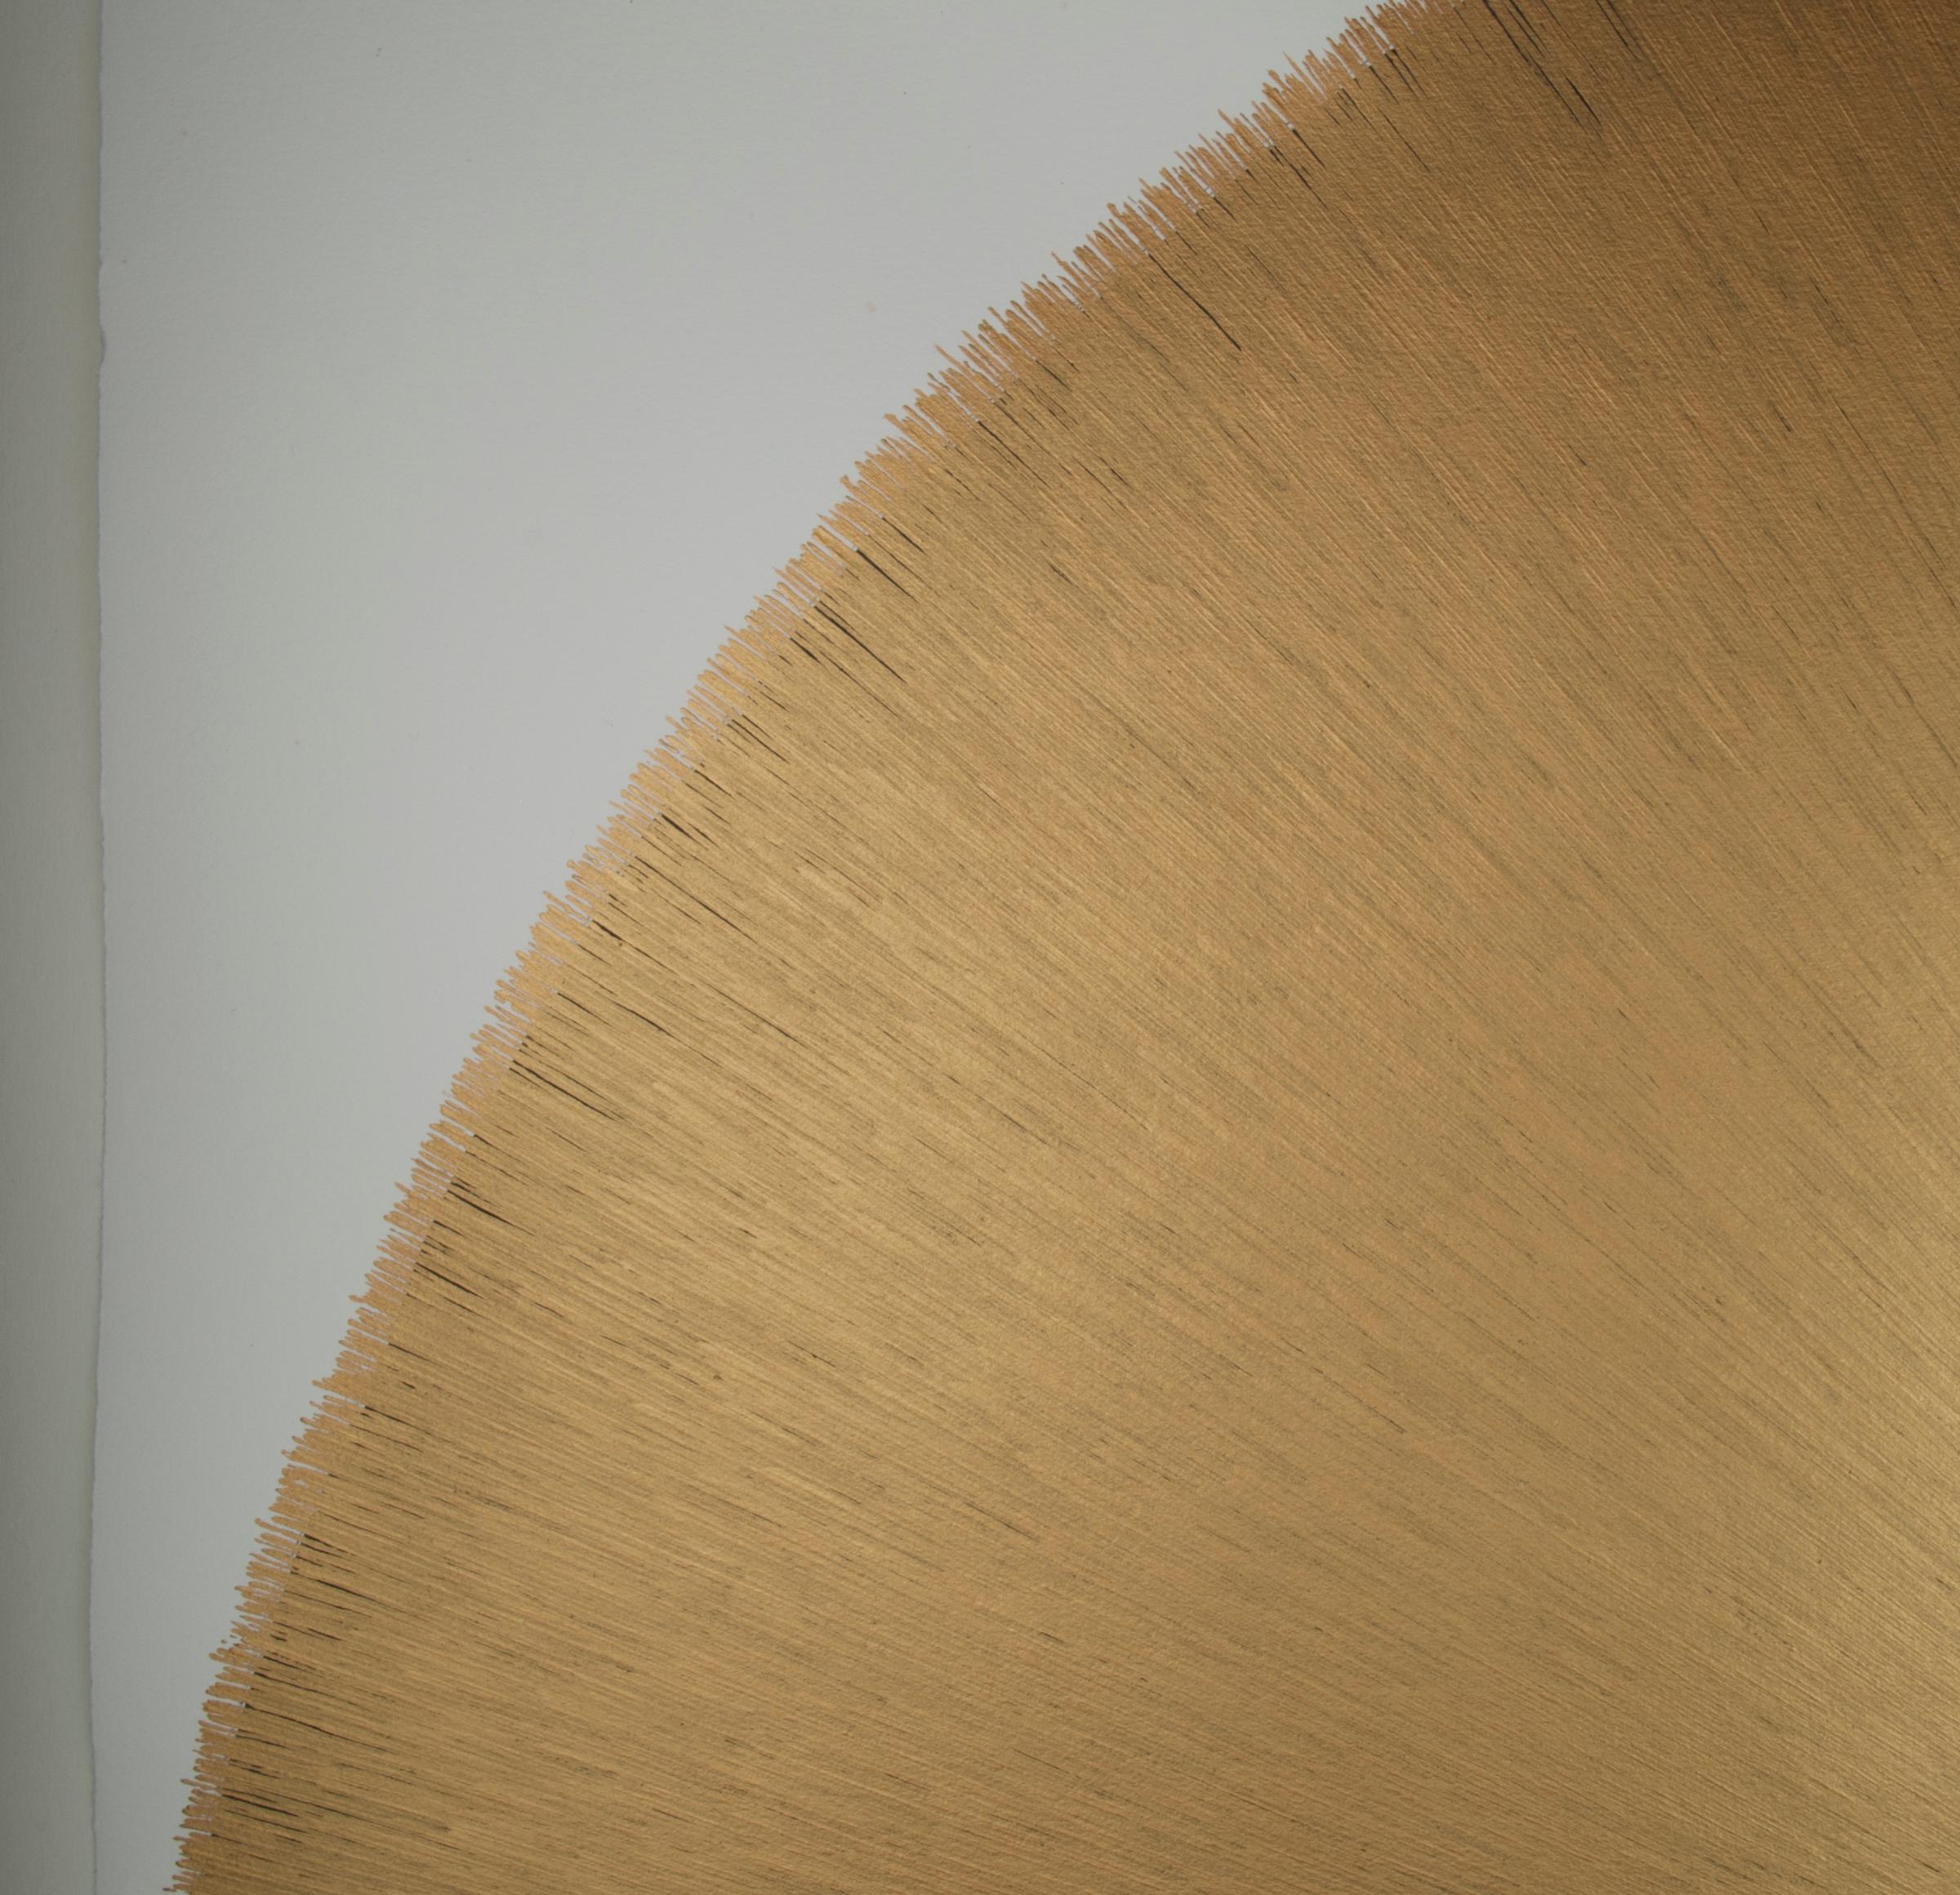 Solid Rod XV: Large, Gold Circular Painting by Silvia Lerin 3